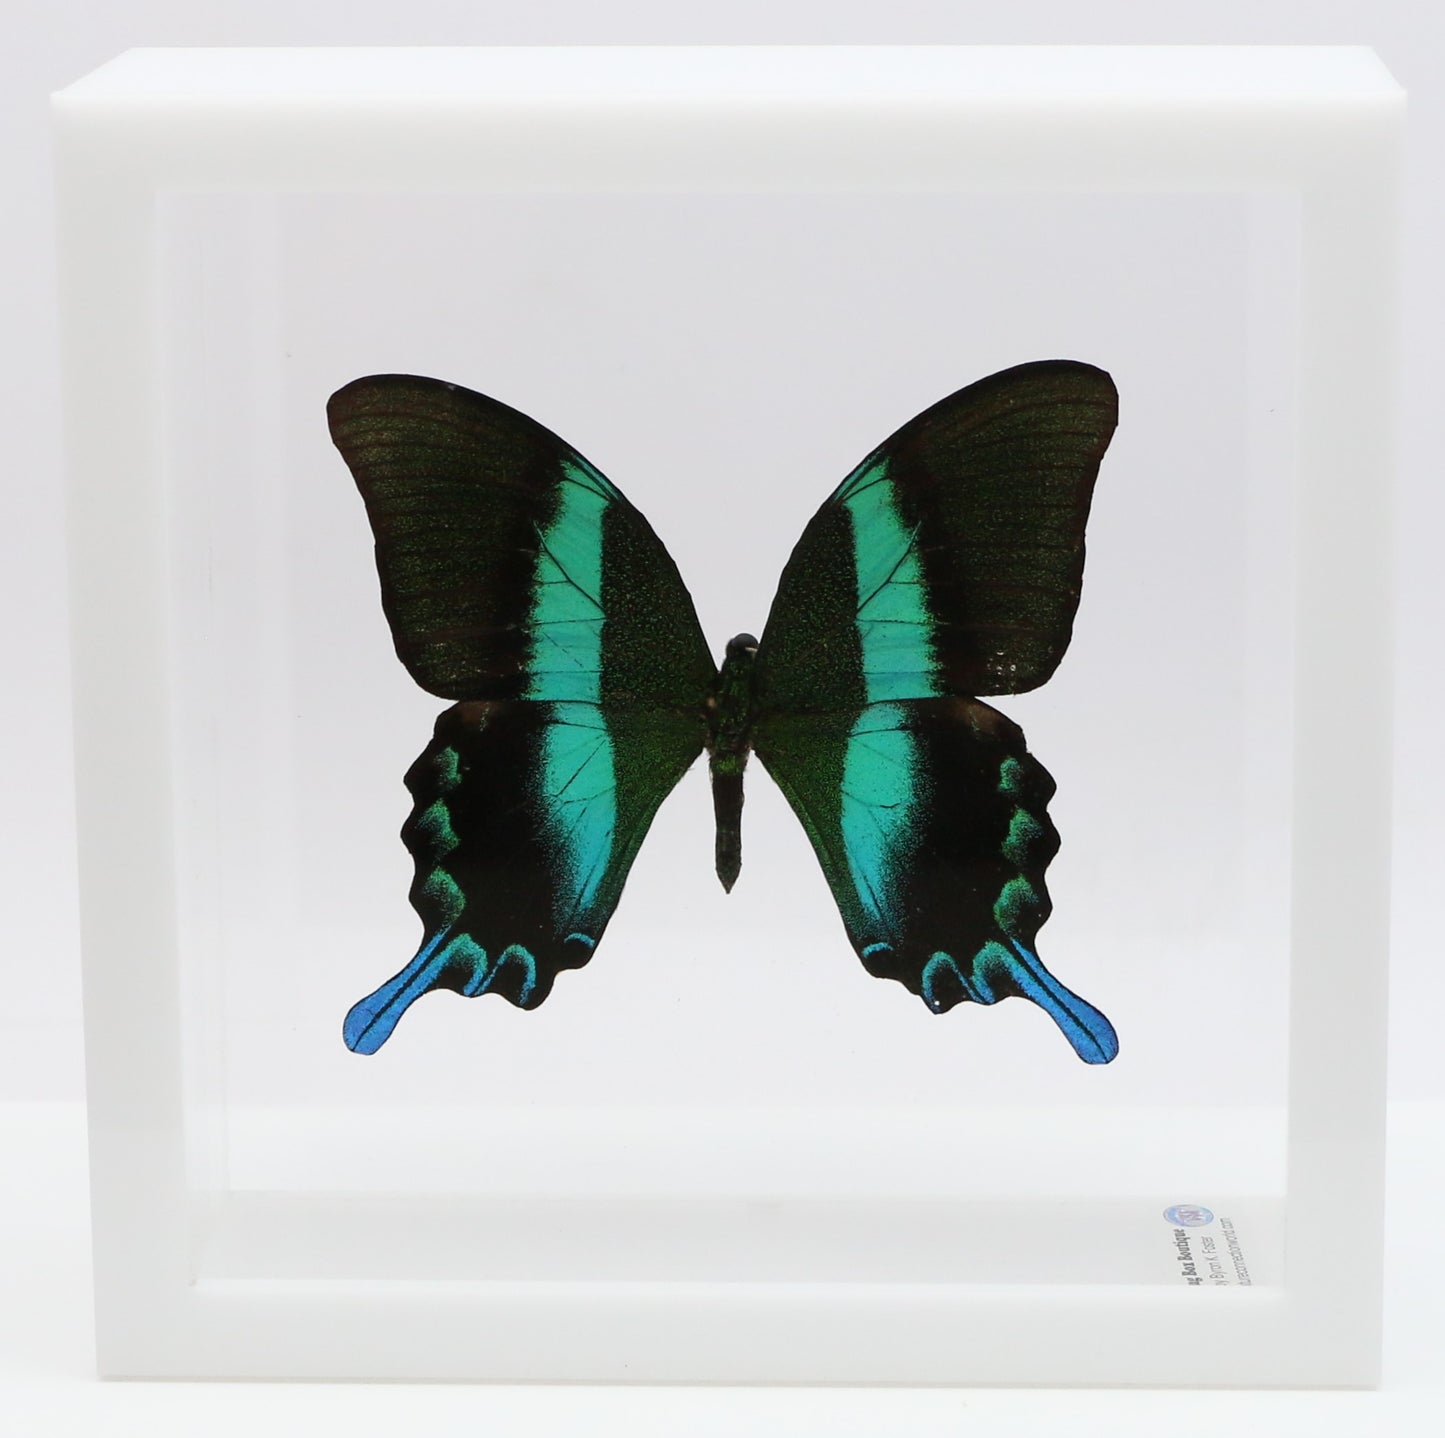 9060611 - Real Butterfly Acrylic Display Box - 6" X 6" - Peacock Swallowtail (Papilio blumei)